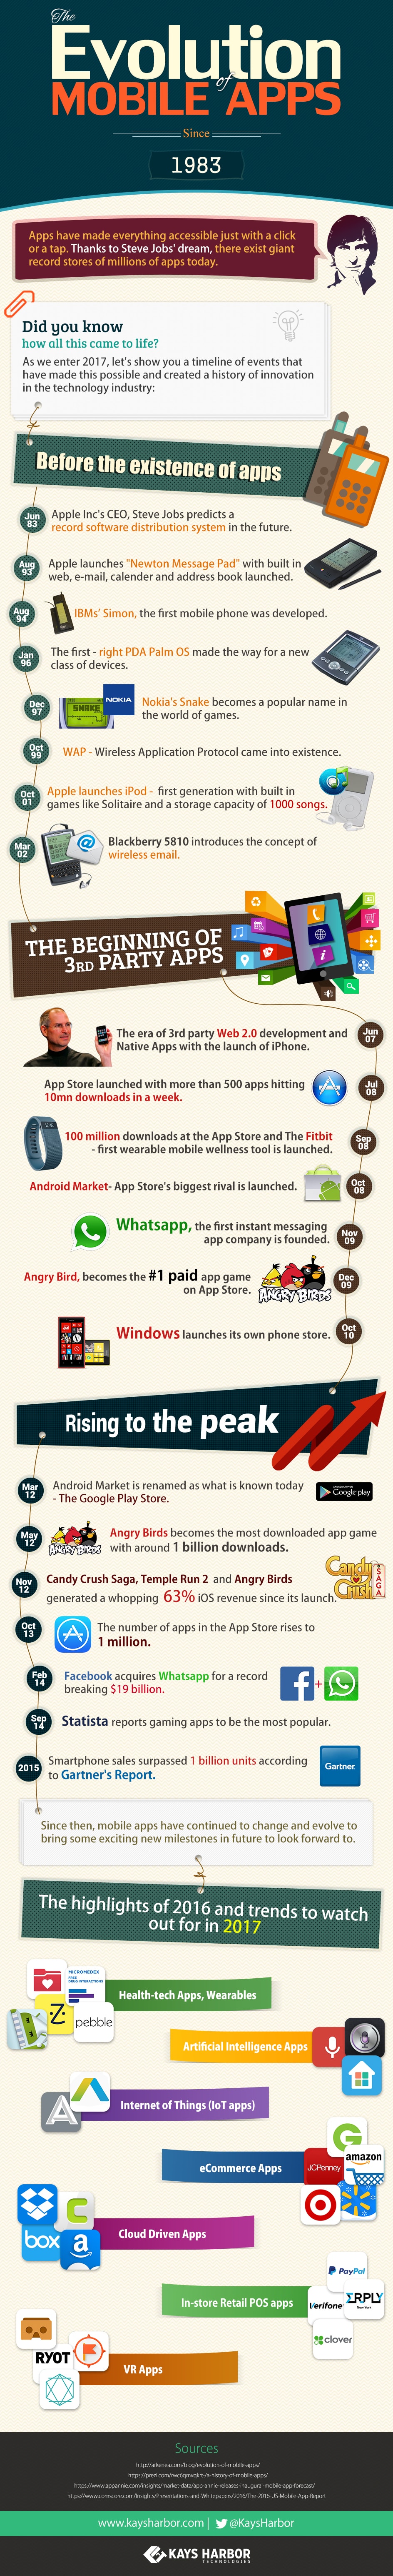 The evolution of mobile apps since 1983